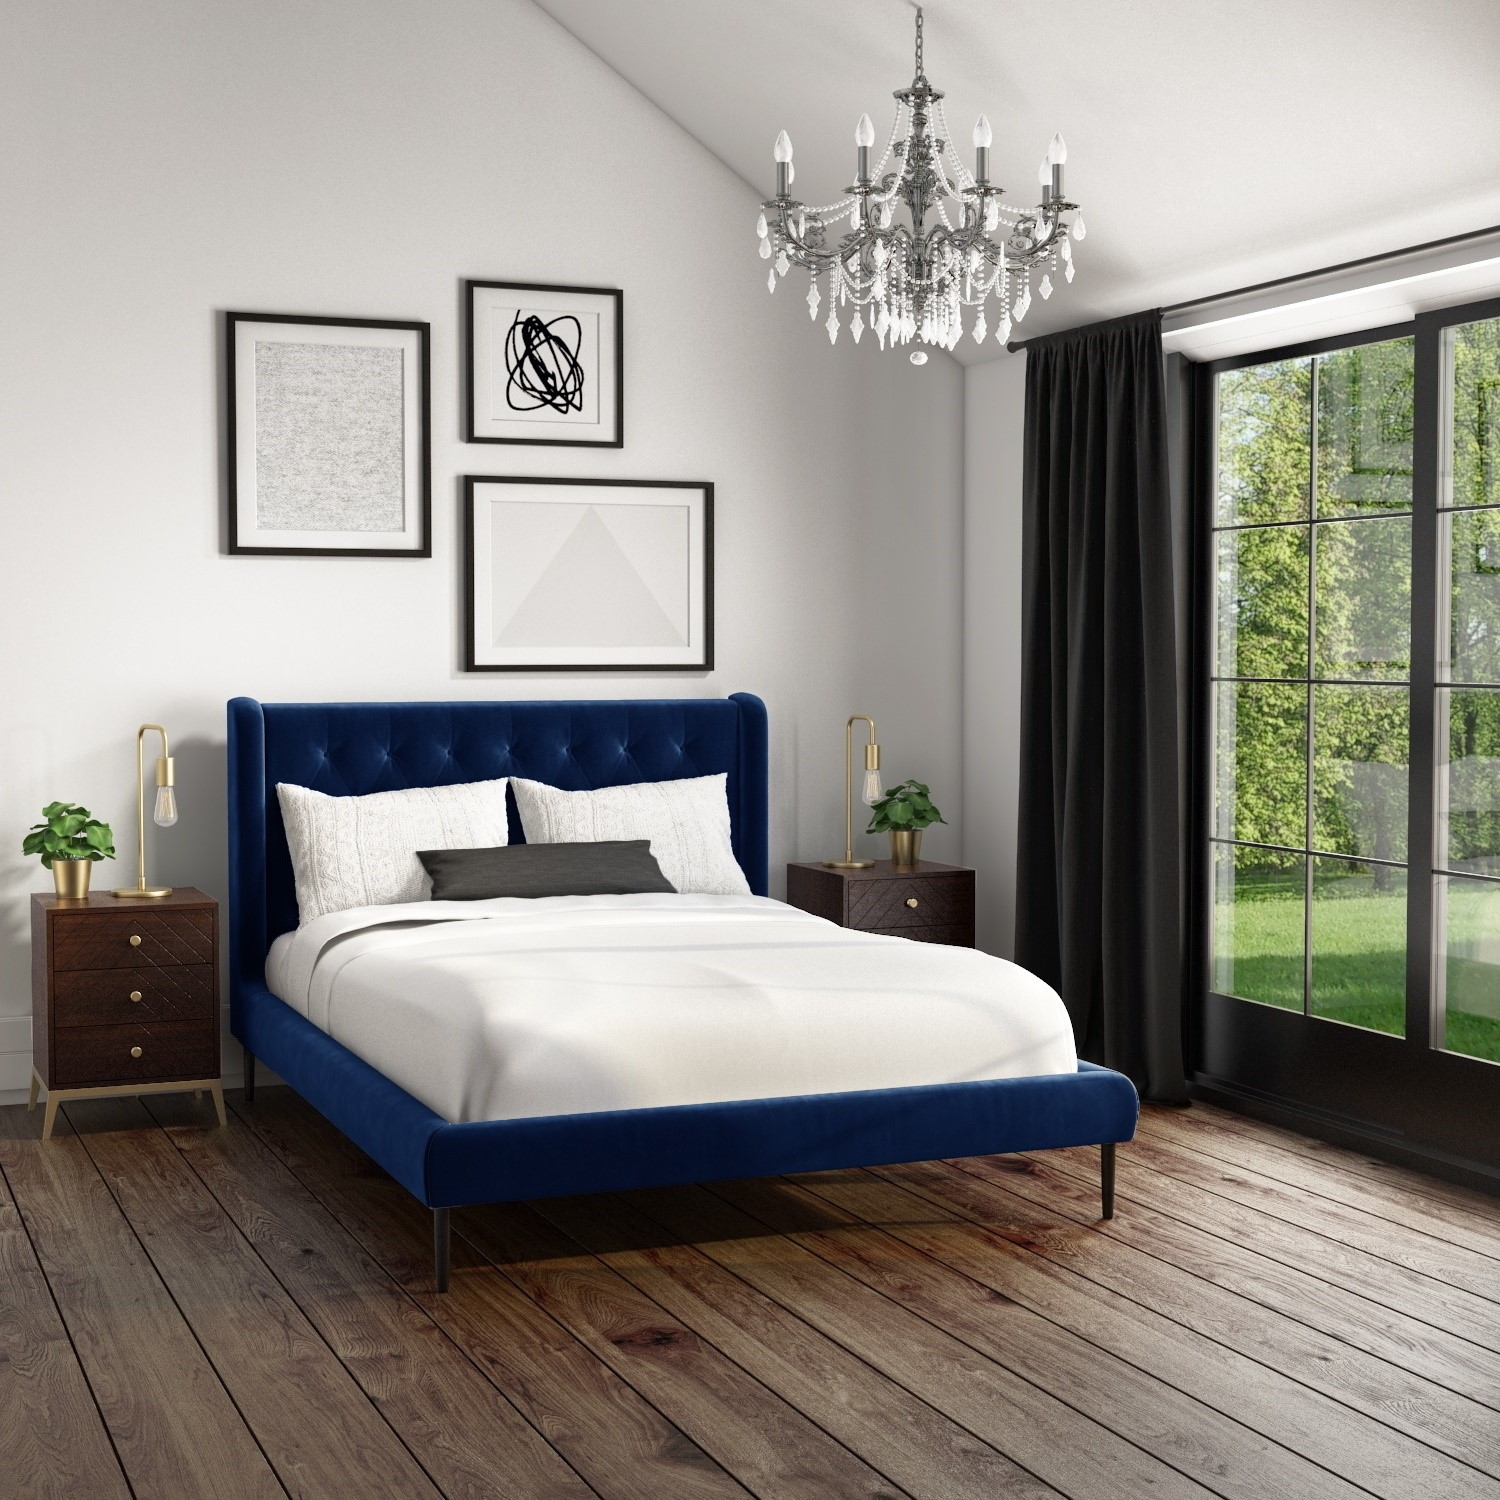 Amara Double Bed Frame In Navy Blue, Double Bed Frame Measurements